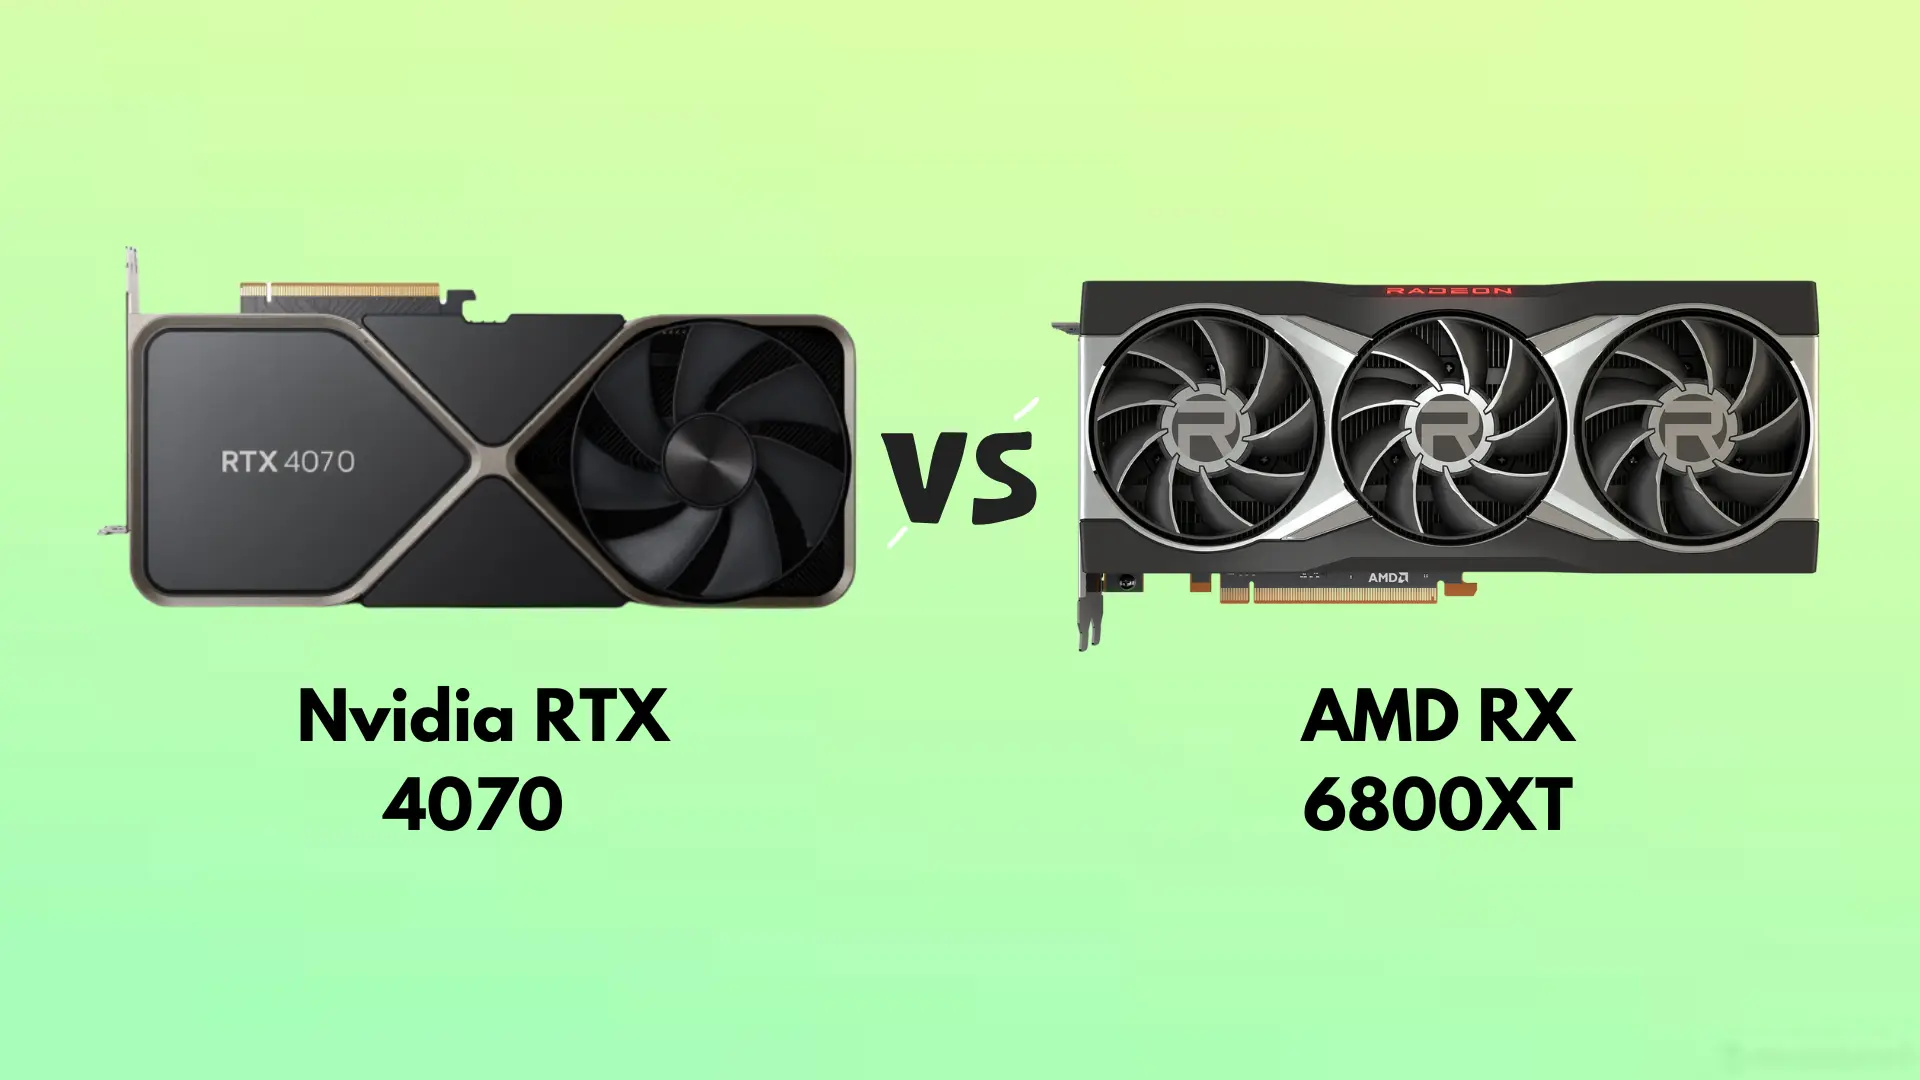 RTX 4070 vs RX 6800XT: Which is a better value?